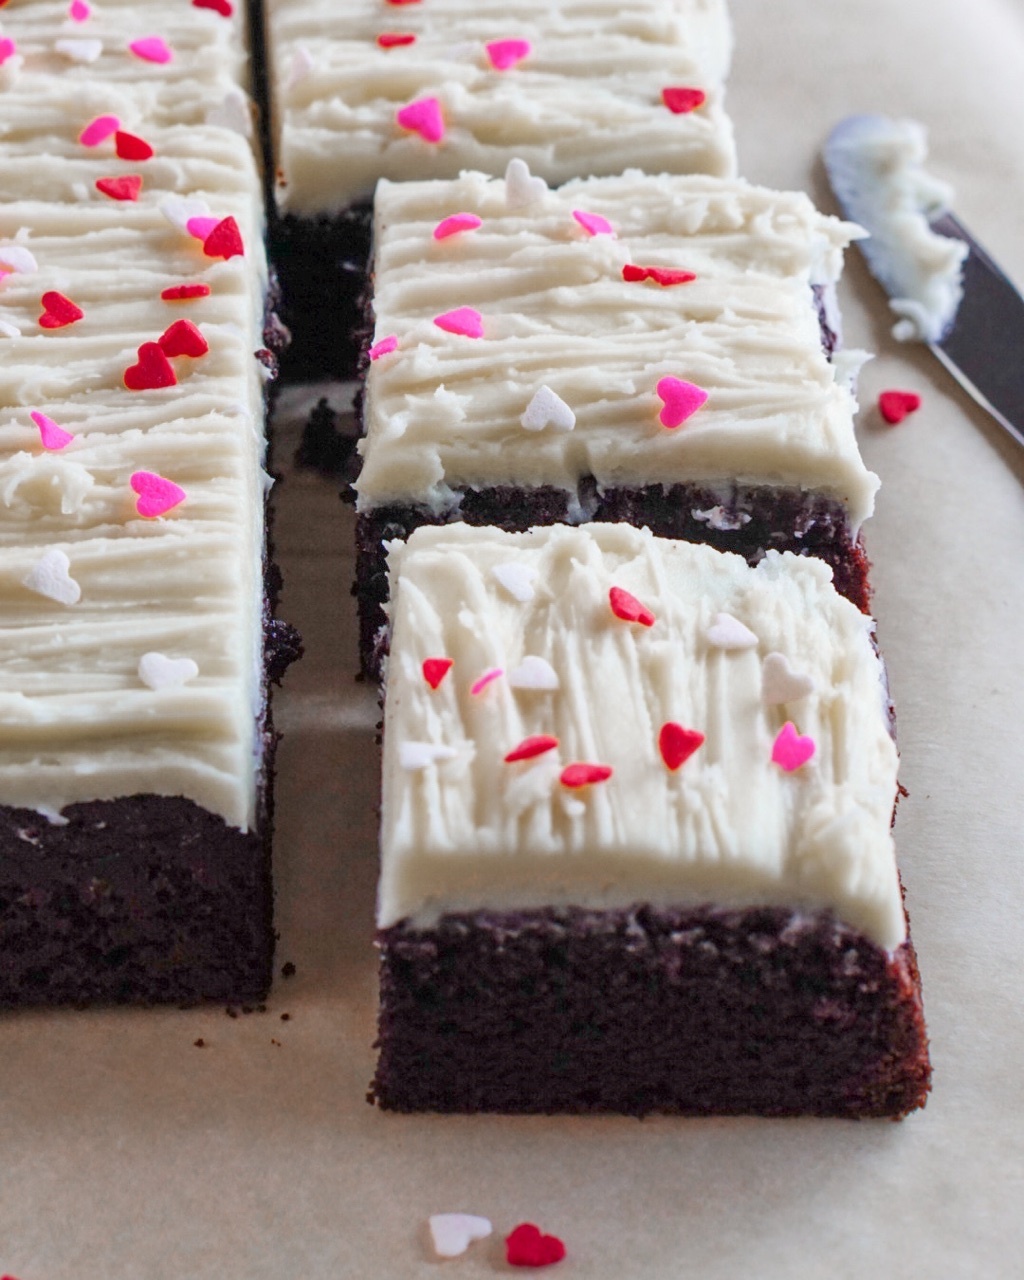 Cut up squares of Chocolate cake